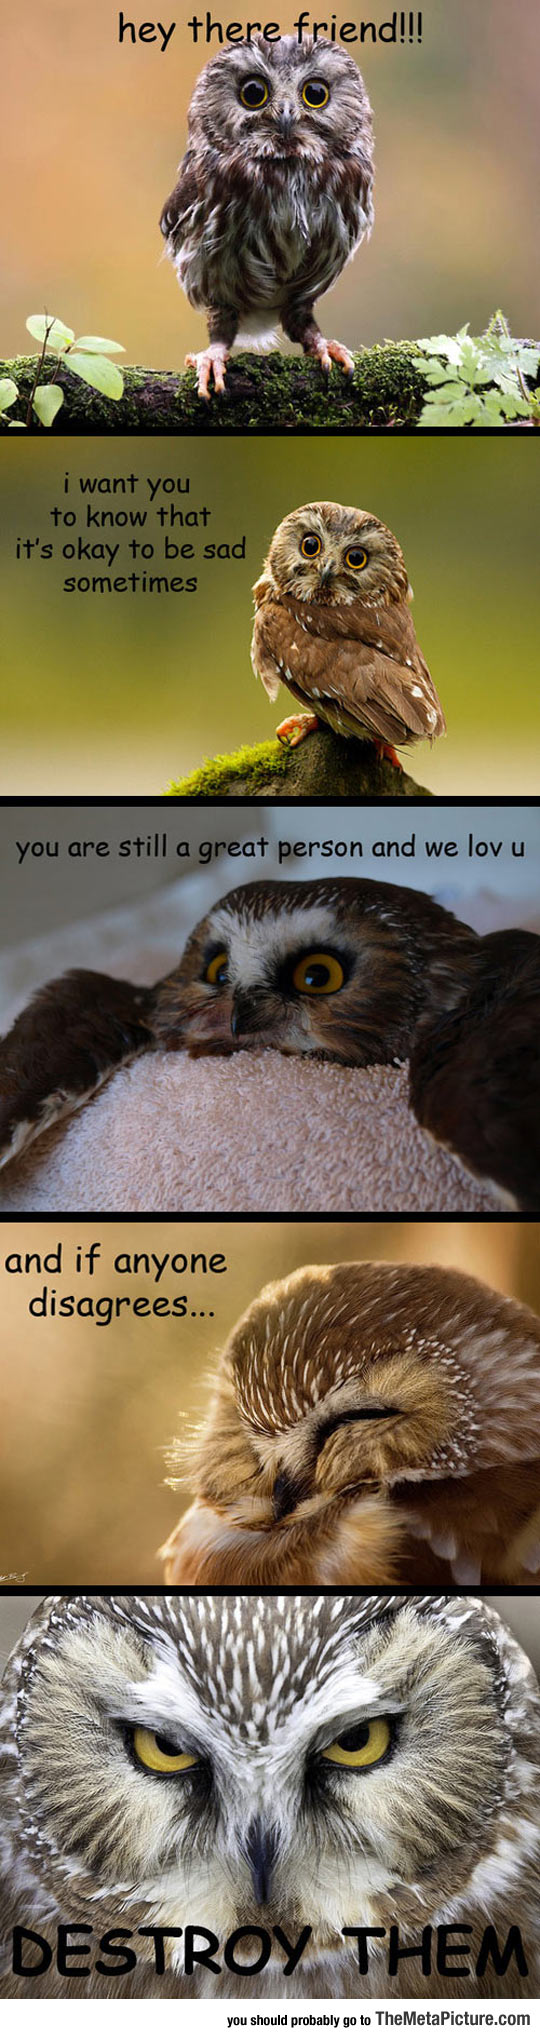 Some Innocent Advice From Your Friendly Owl